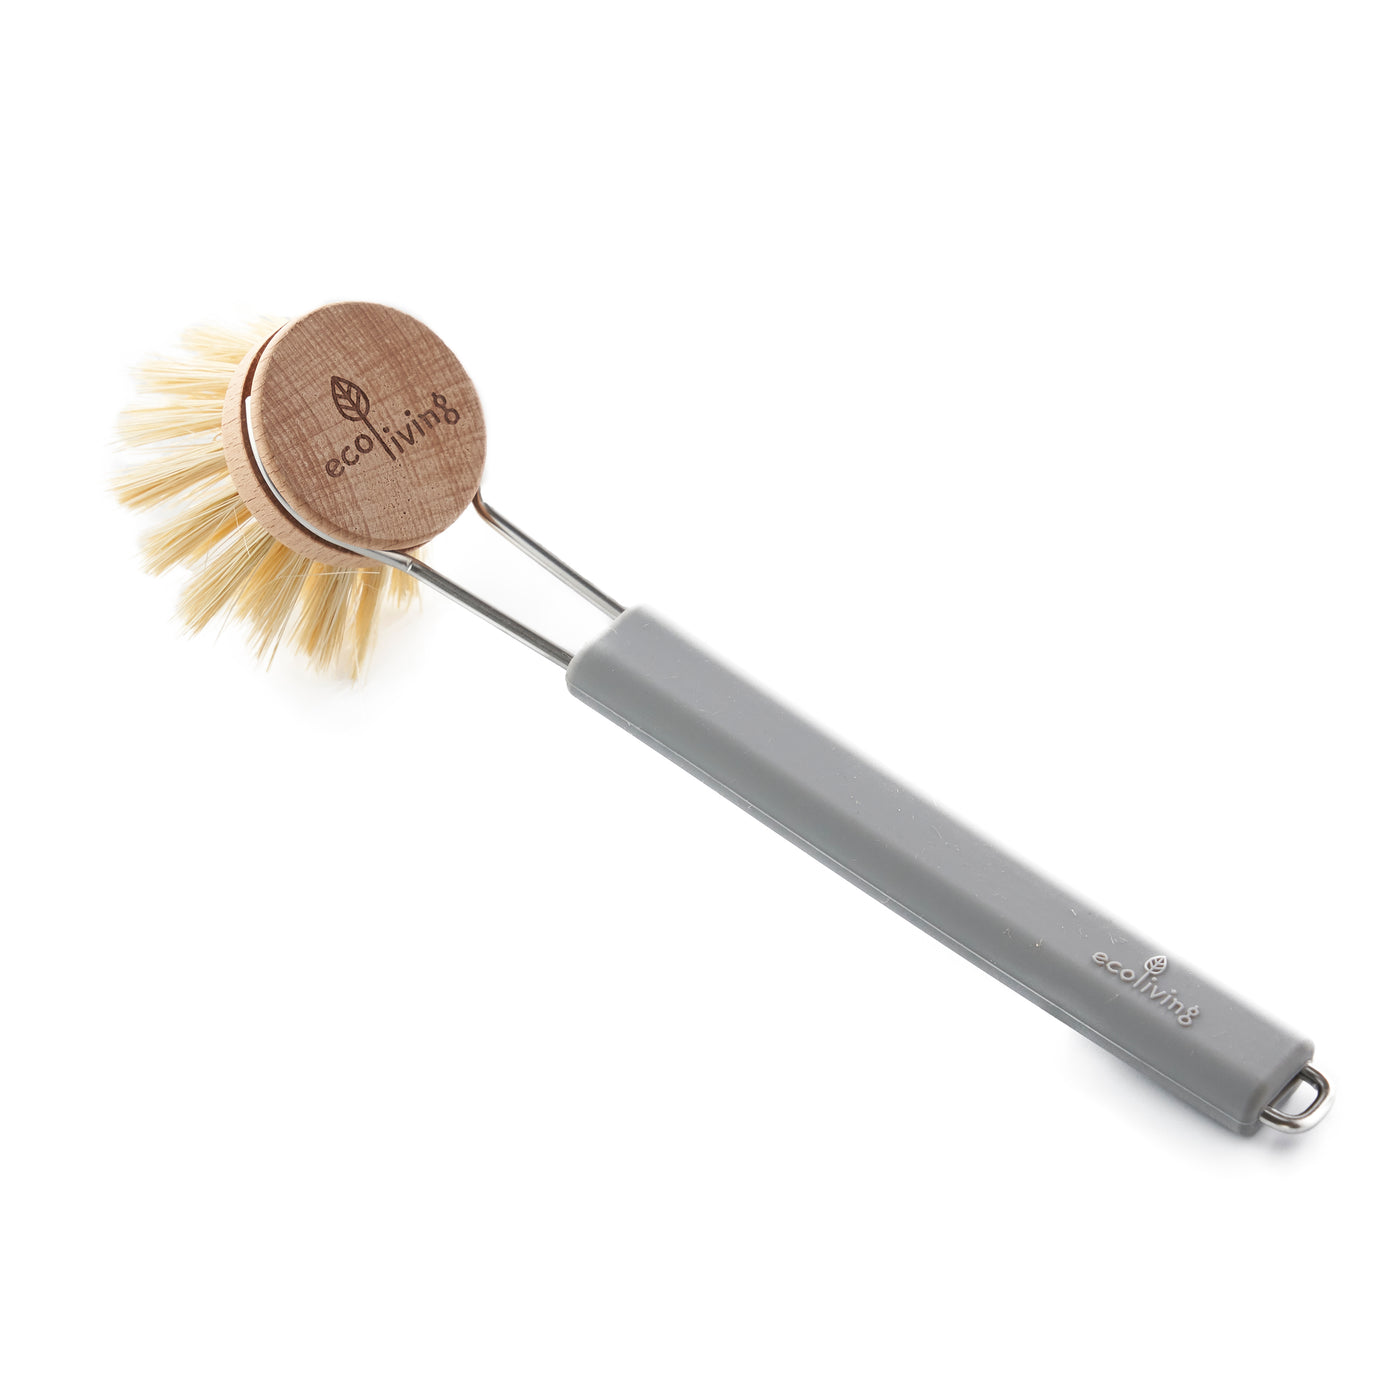 EcoLiving Dish Brush with Replaceable Head - Grey Handle